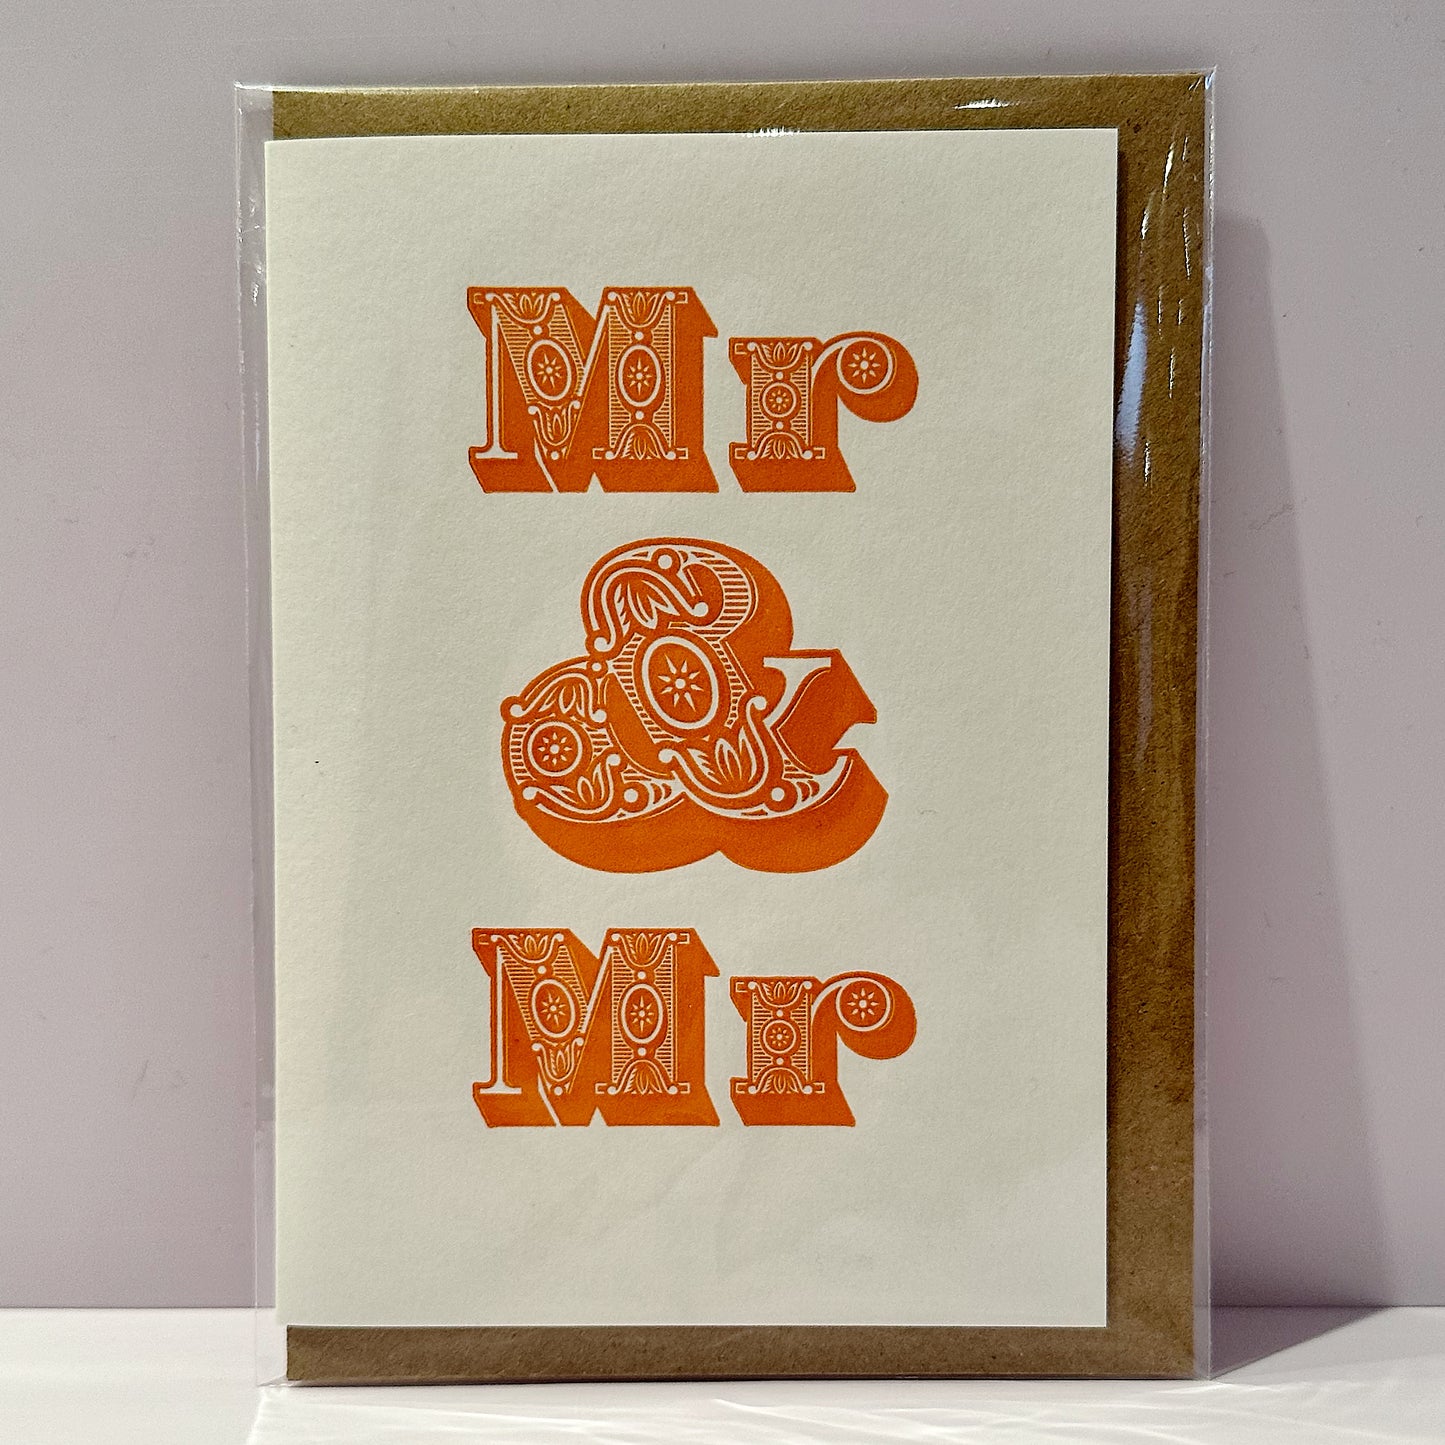 Mr and Mr Greetings Card